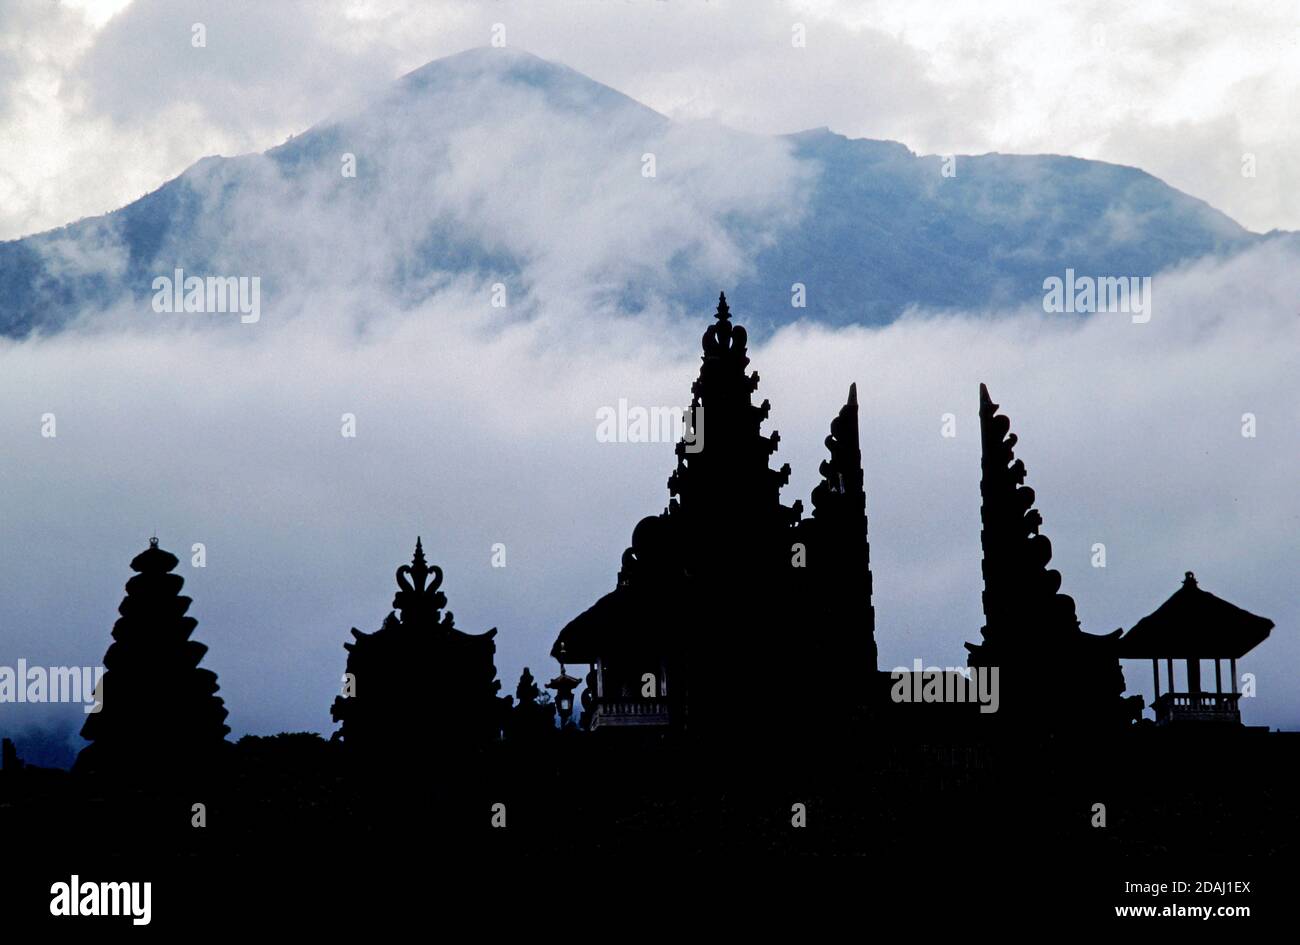 Besakih Temple, Bali, Indonesia with Agung Volcano in the background Stock Photo